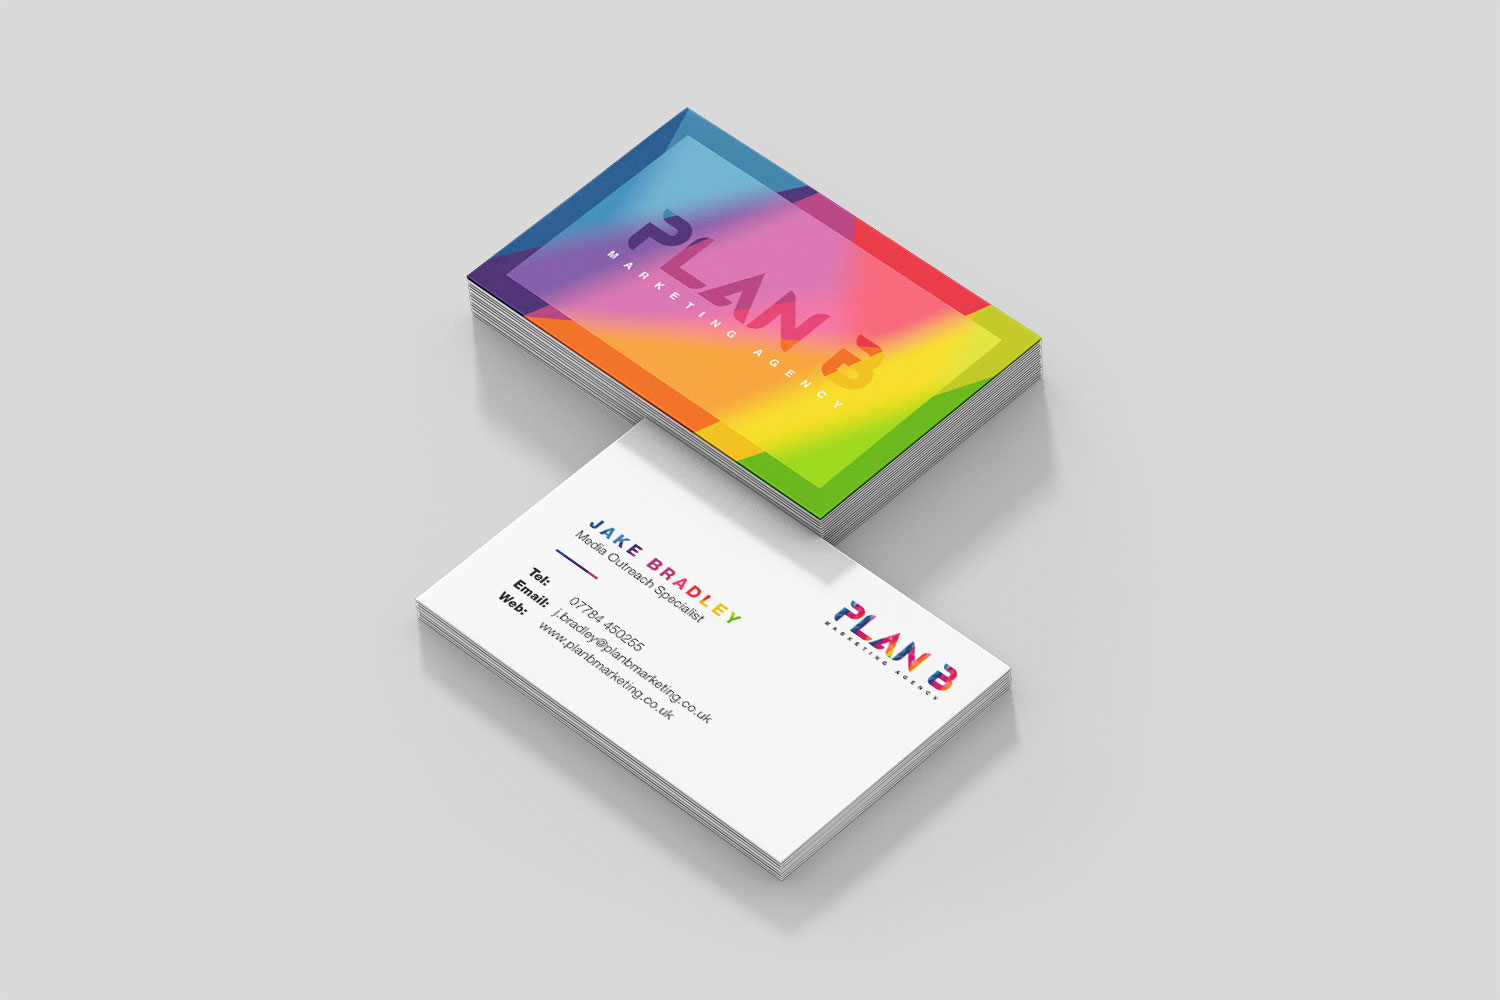 Impress your clients with our high quality business cards. Choose our Same Day Standard Business Cards for a swift, professional touch to your networking.